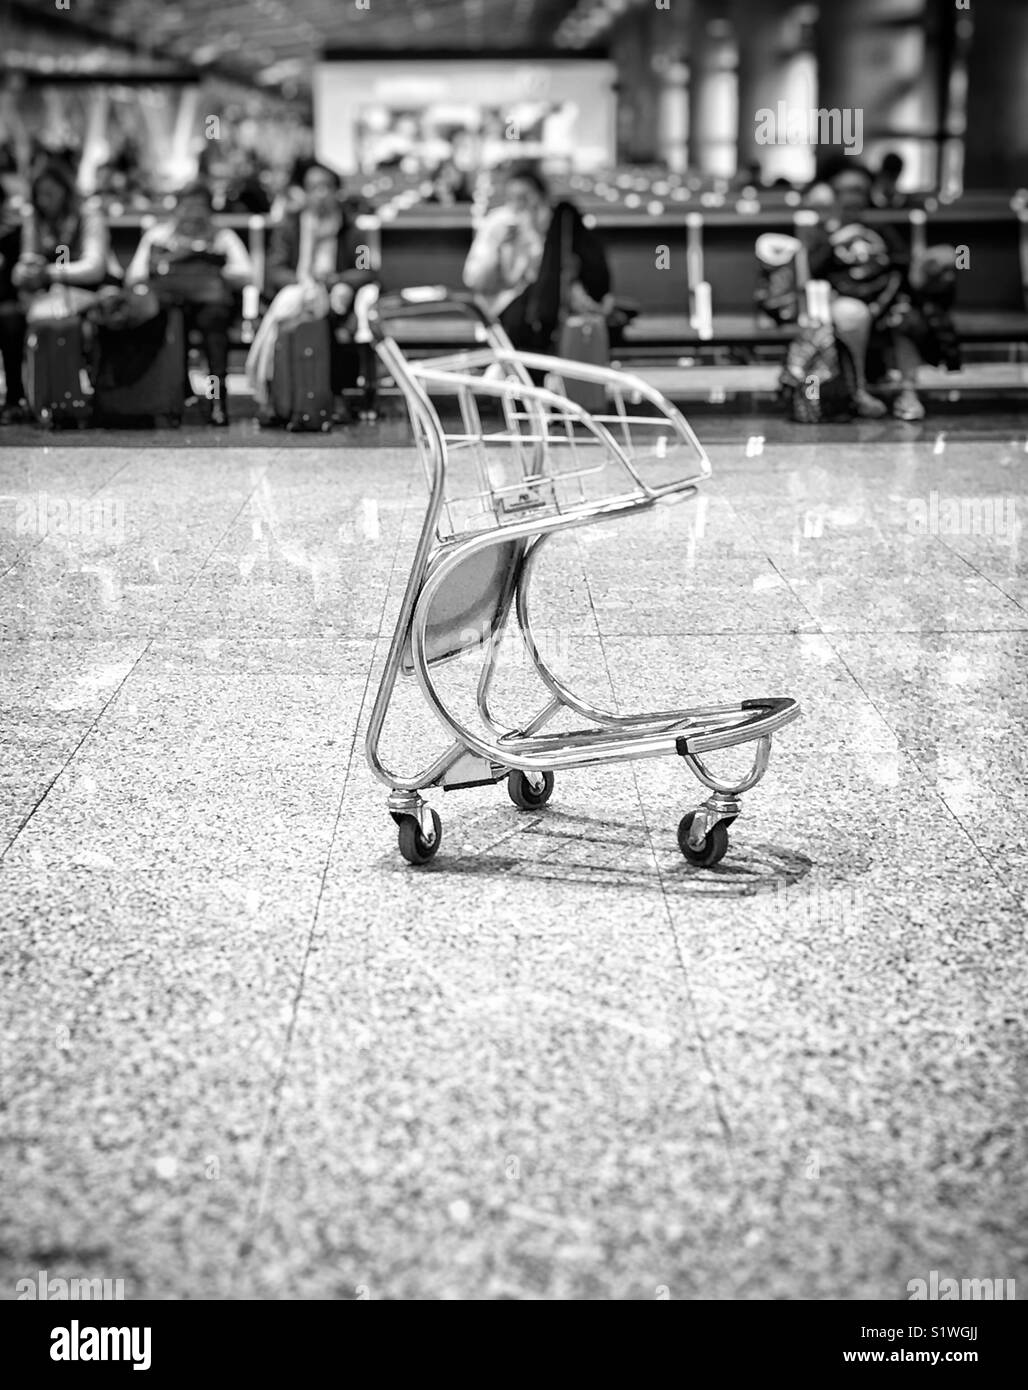 Empty baggage trolley in departure lounge of airport with rows of seated passengers in the background. Photo in monochrome Stock Photo